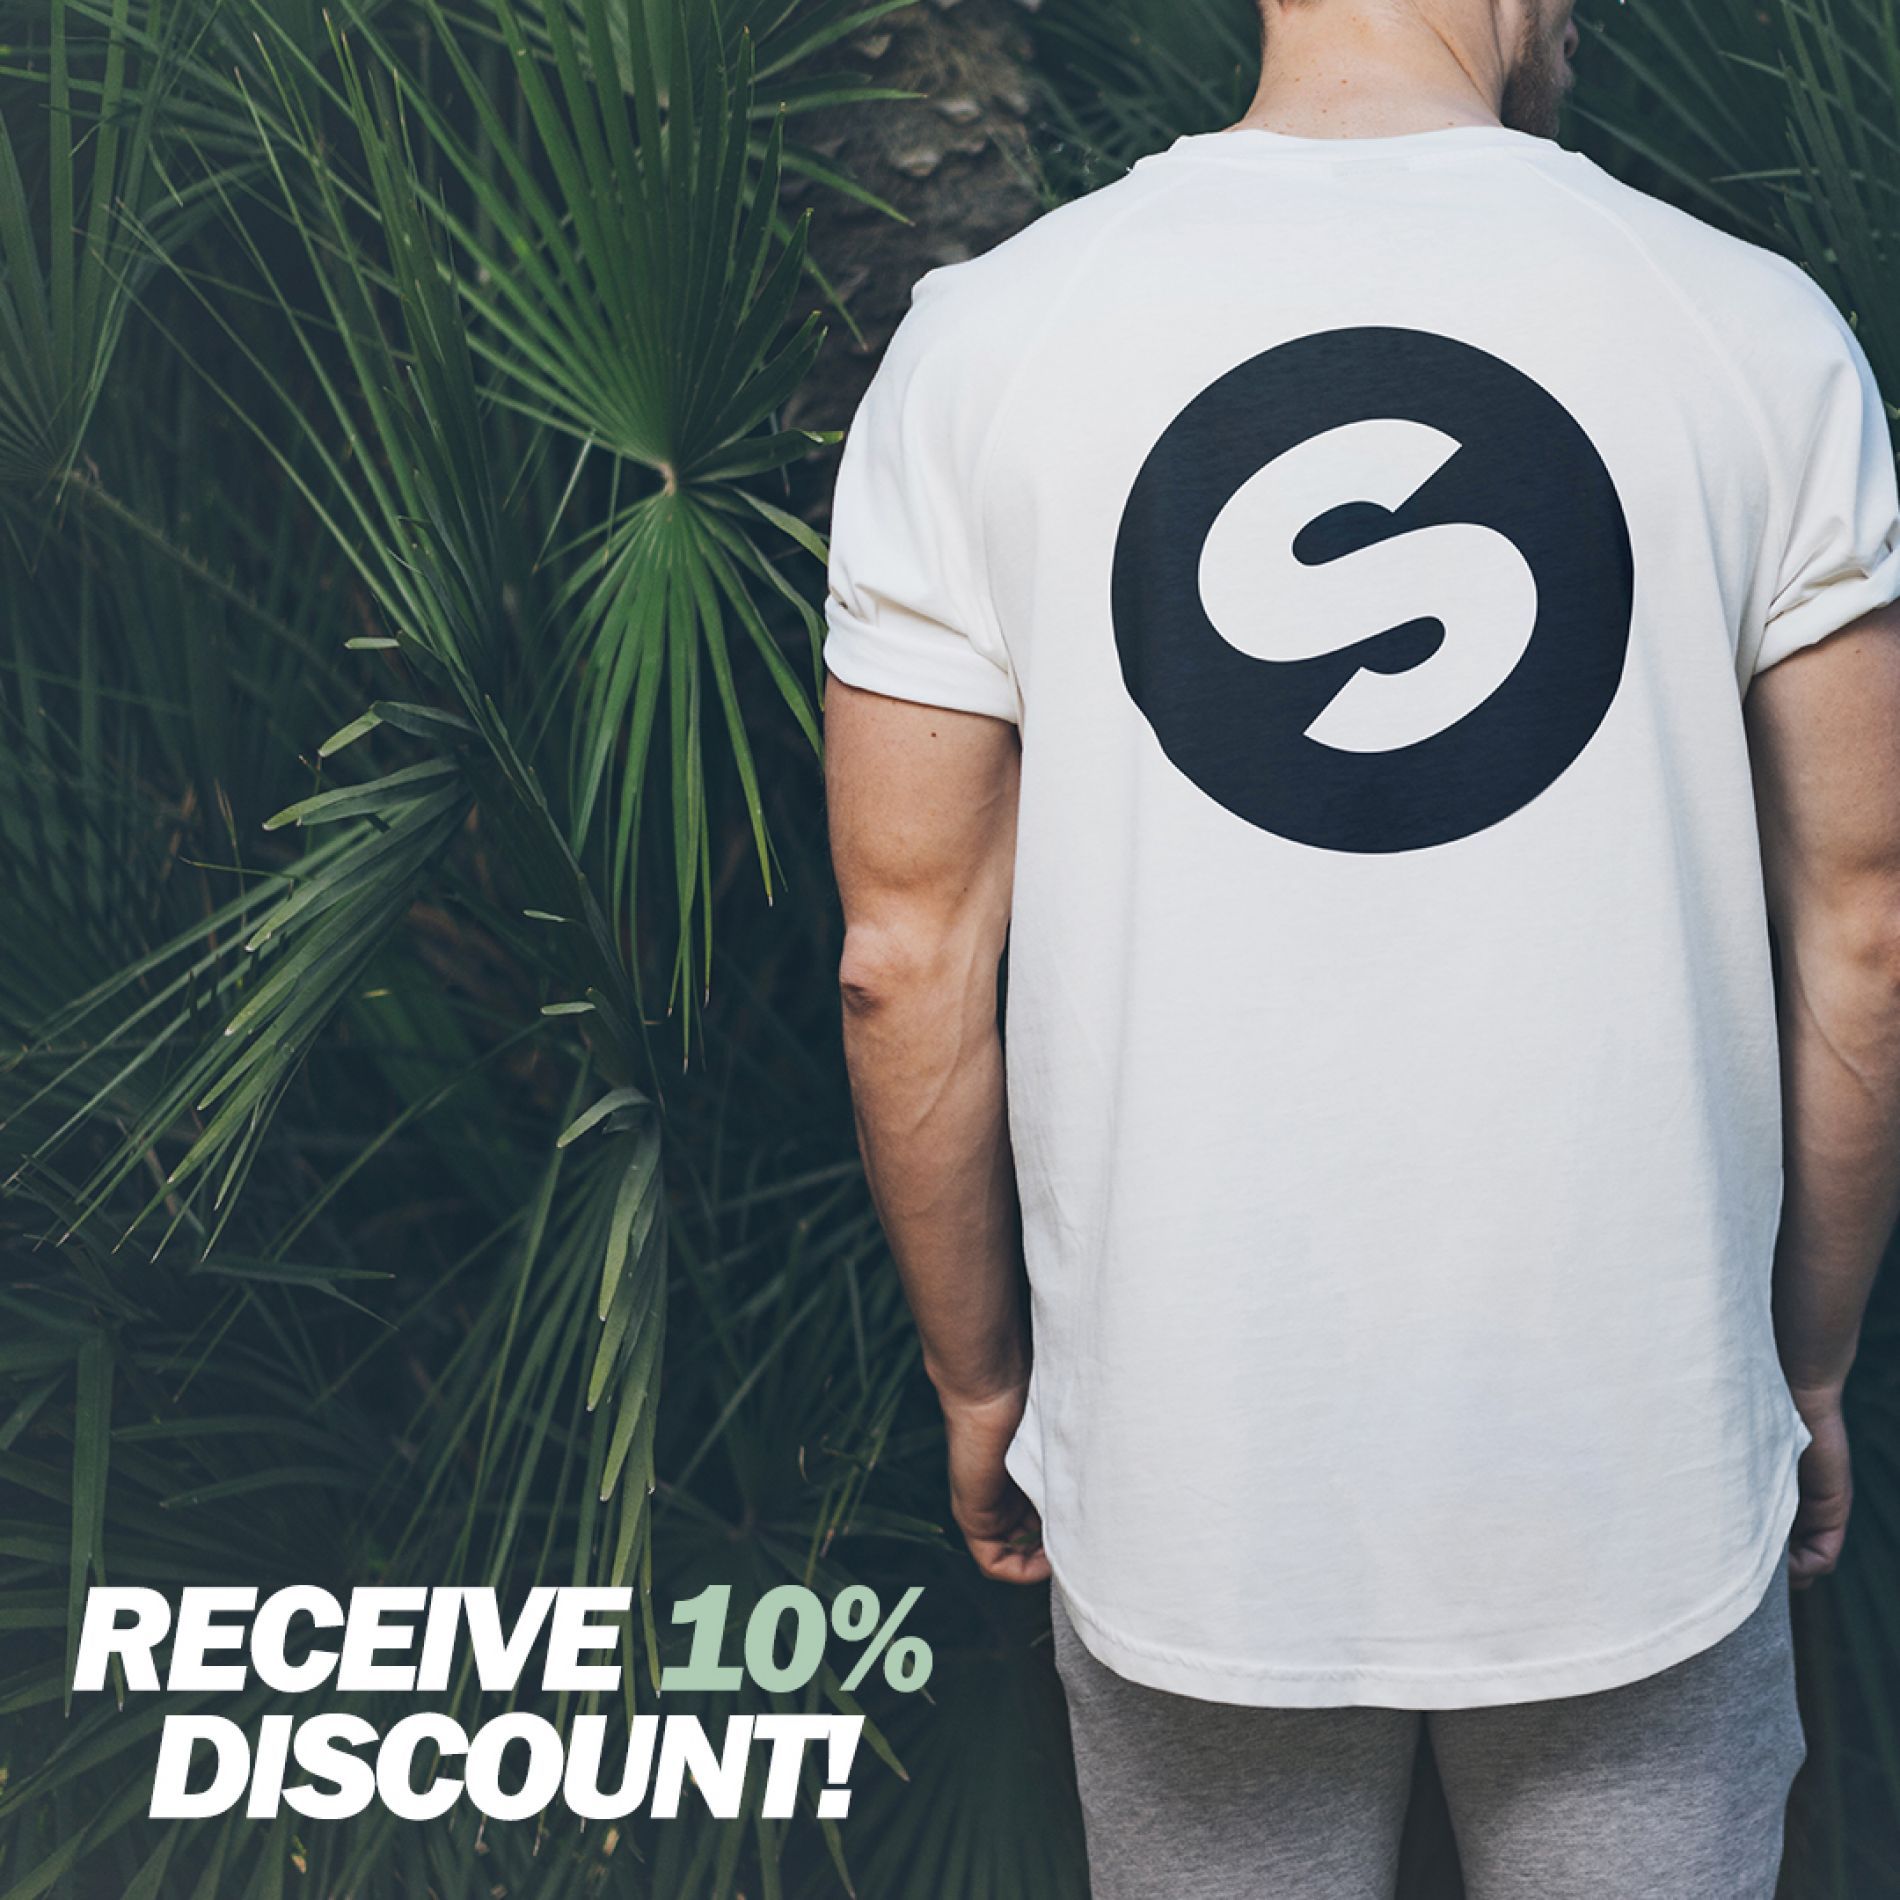 Receive 10% discount on the Spinnin' Long White Tee!